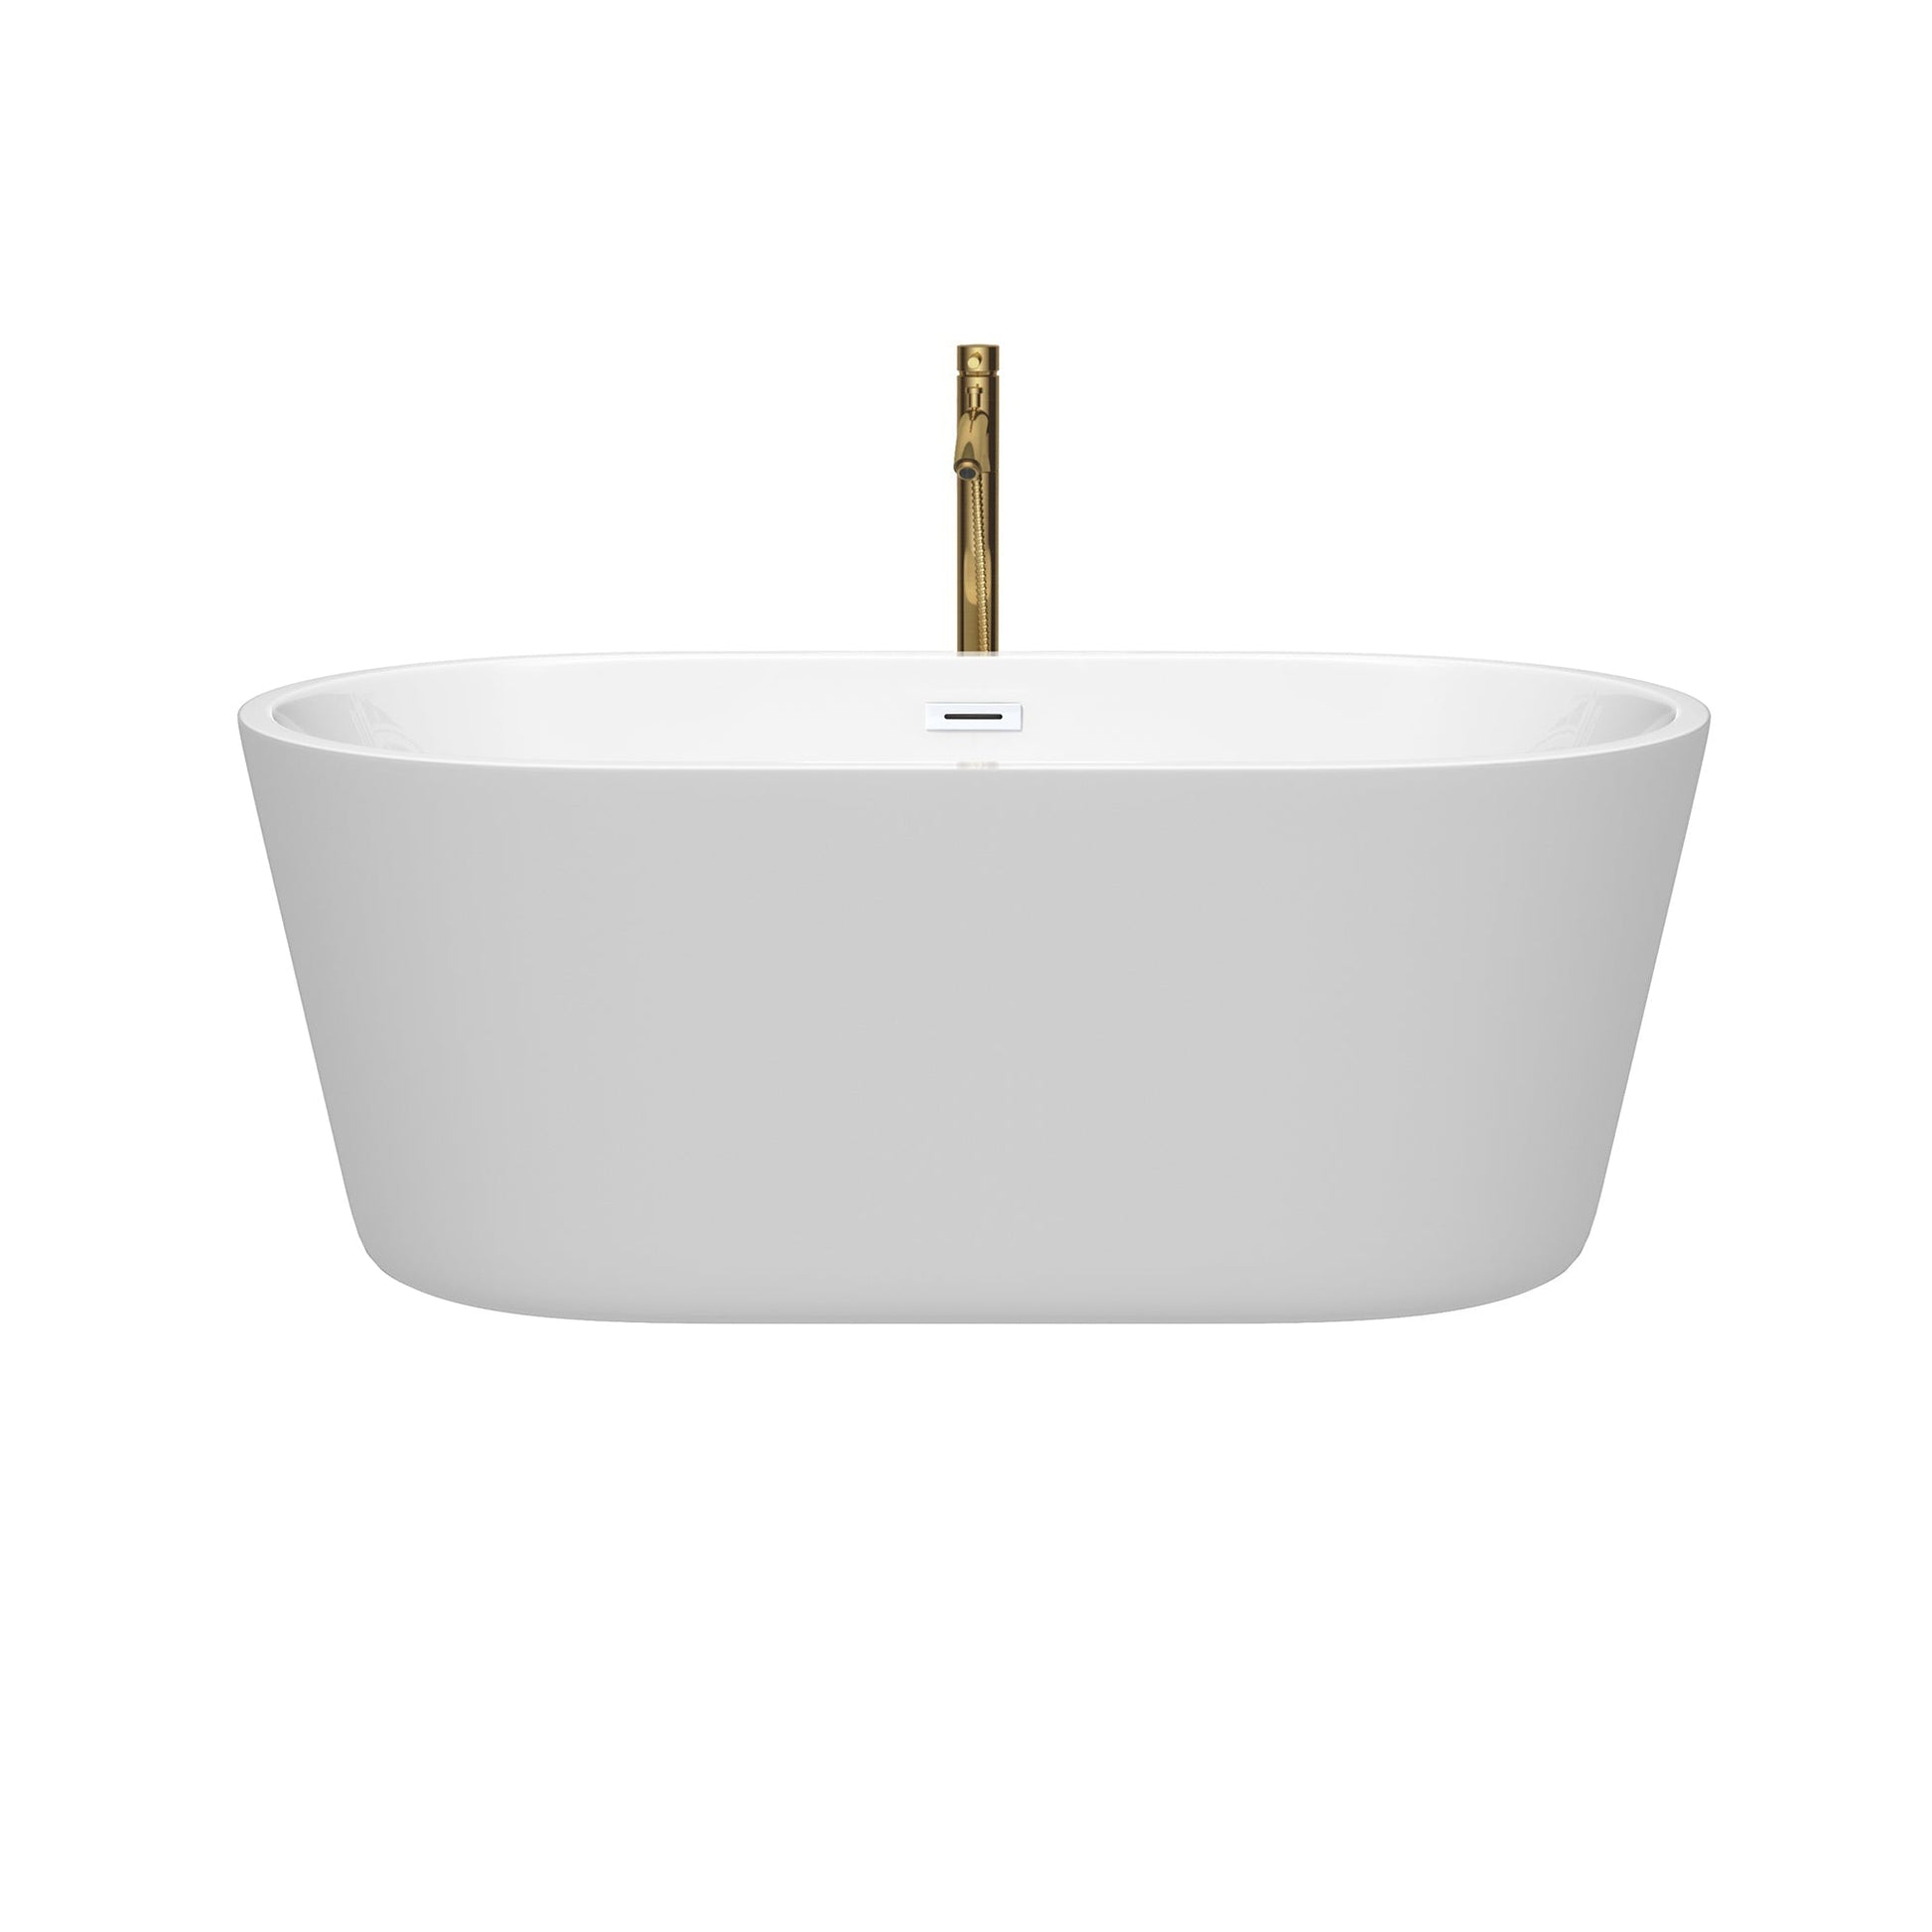 Wyndham Collection Carissa 60" Freestanding Bathtub in White With Shiny White Trim and Floor Mounted Faucet in Brushed Gold